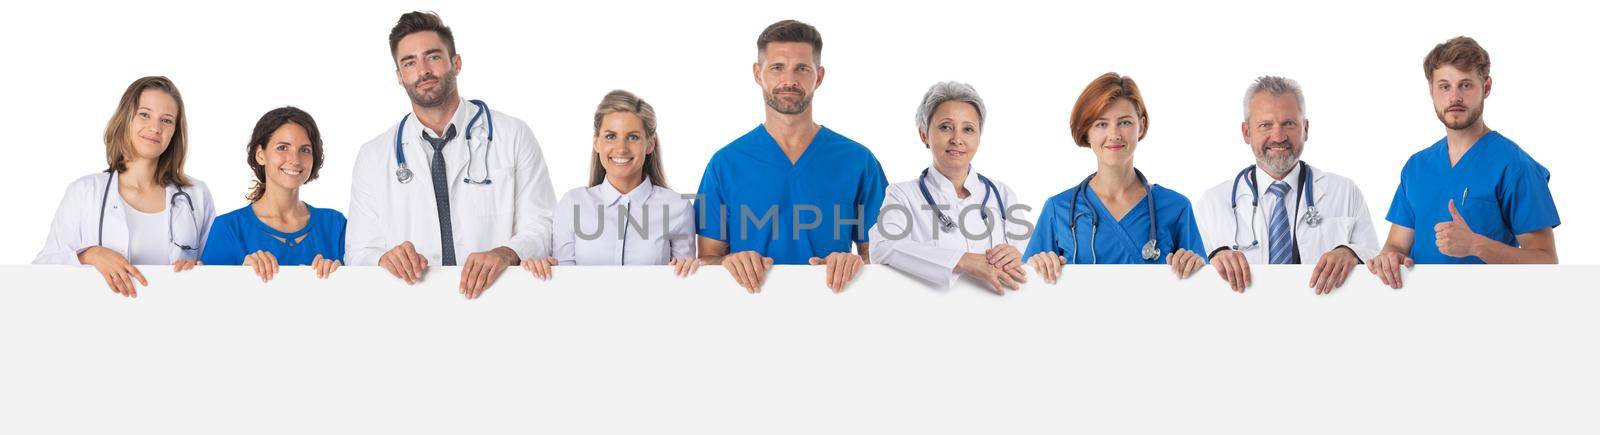 Group of doctors with empty banner by ALotOfPeople